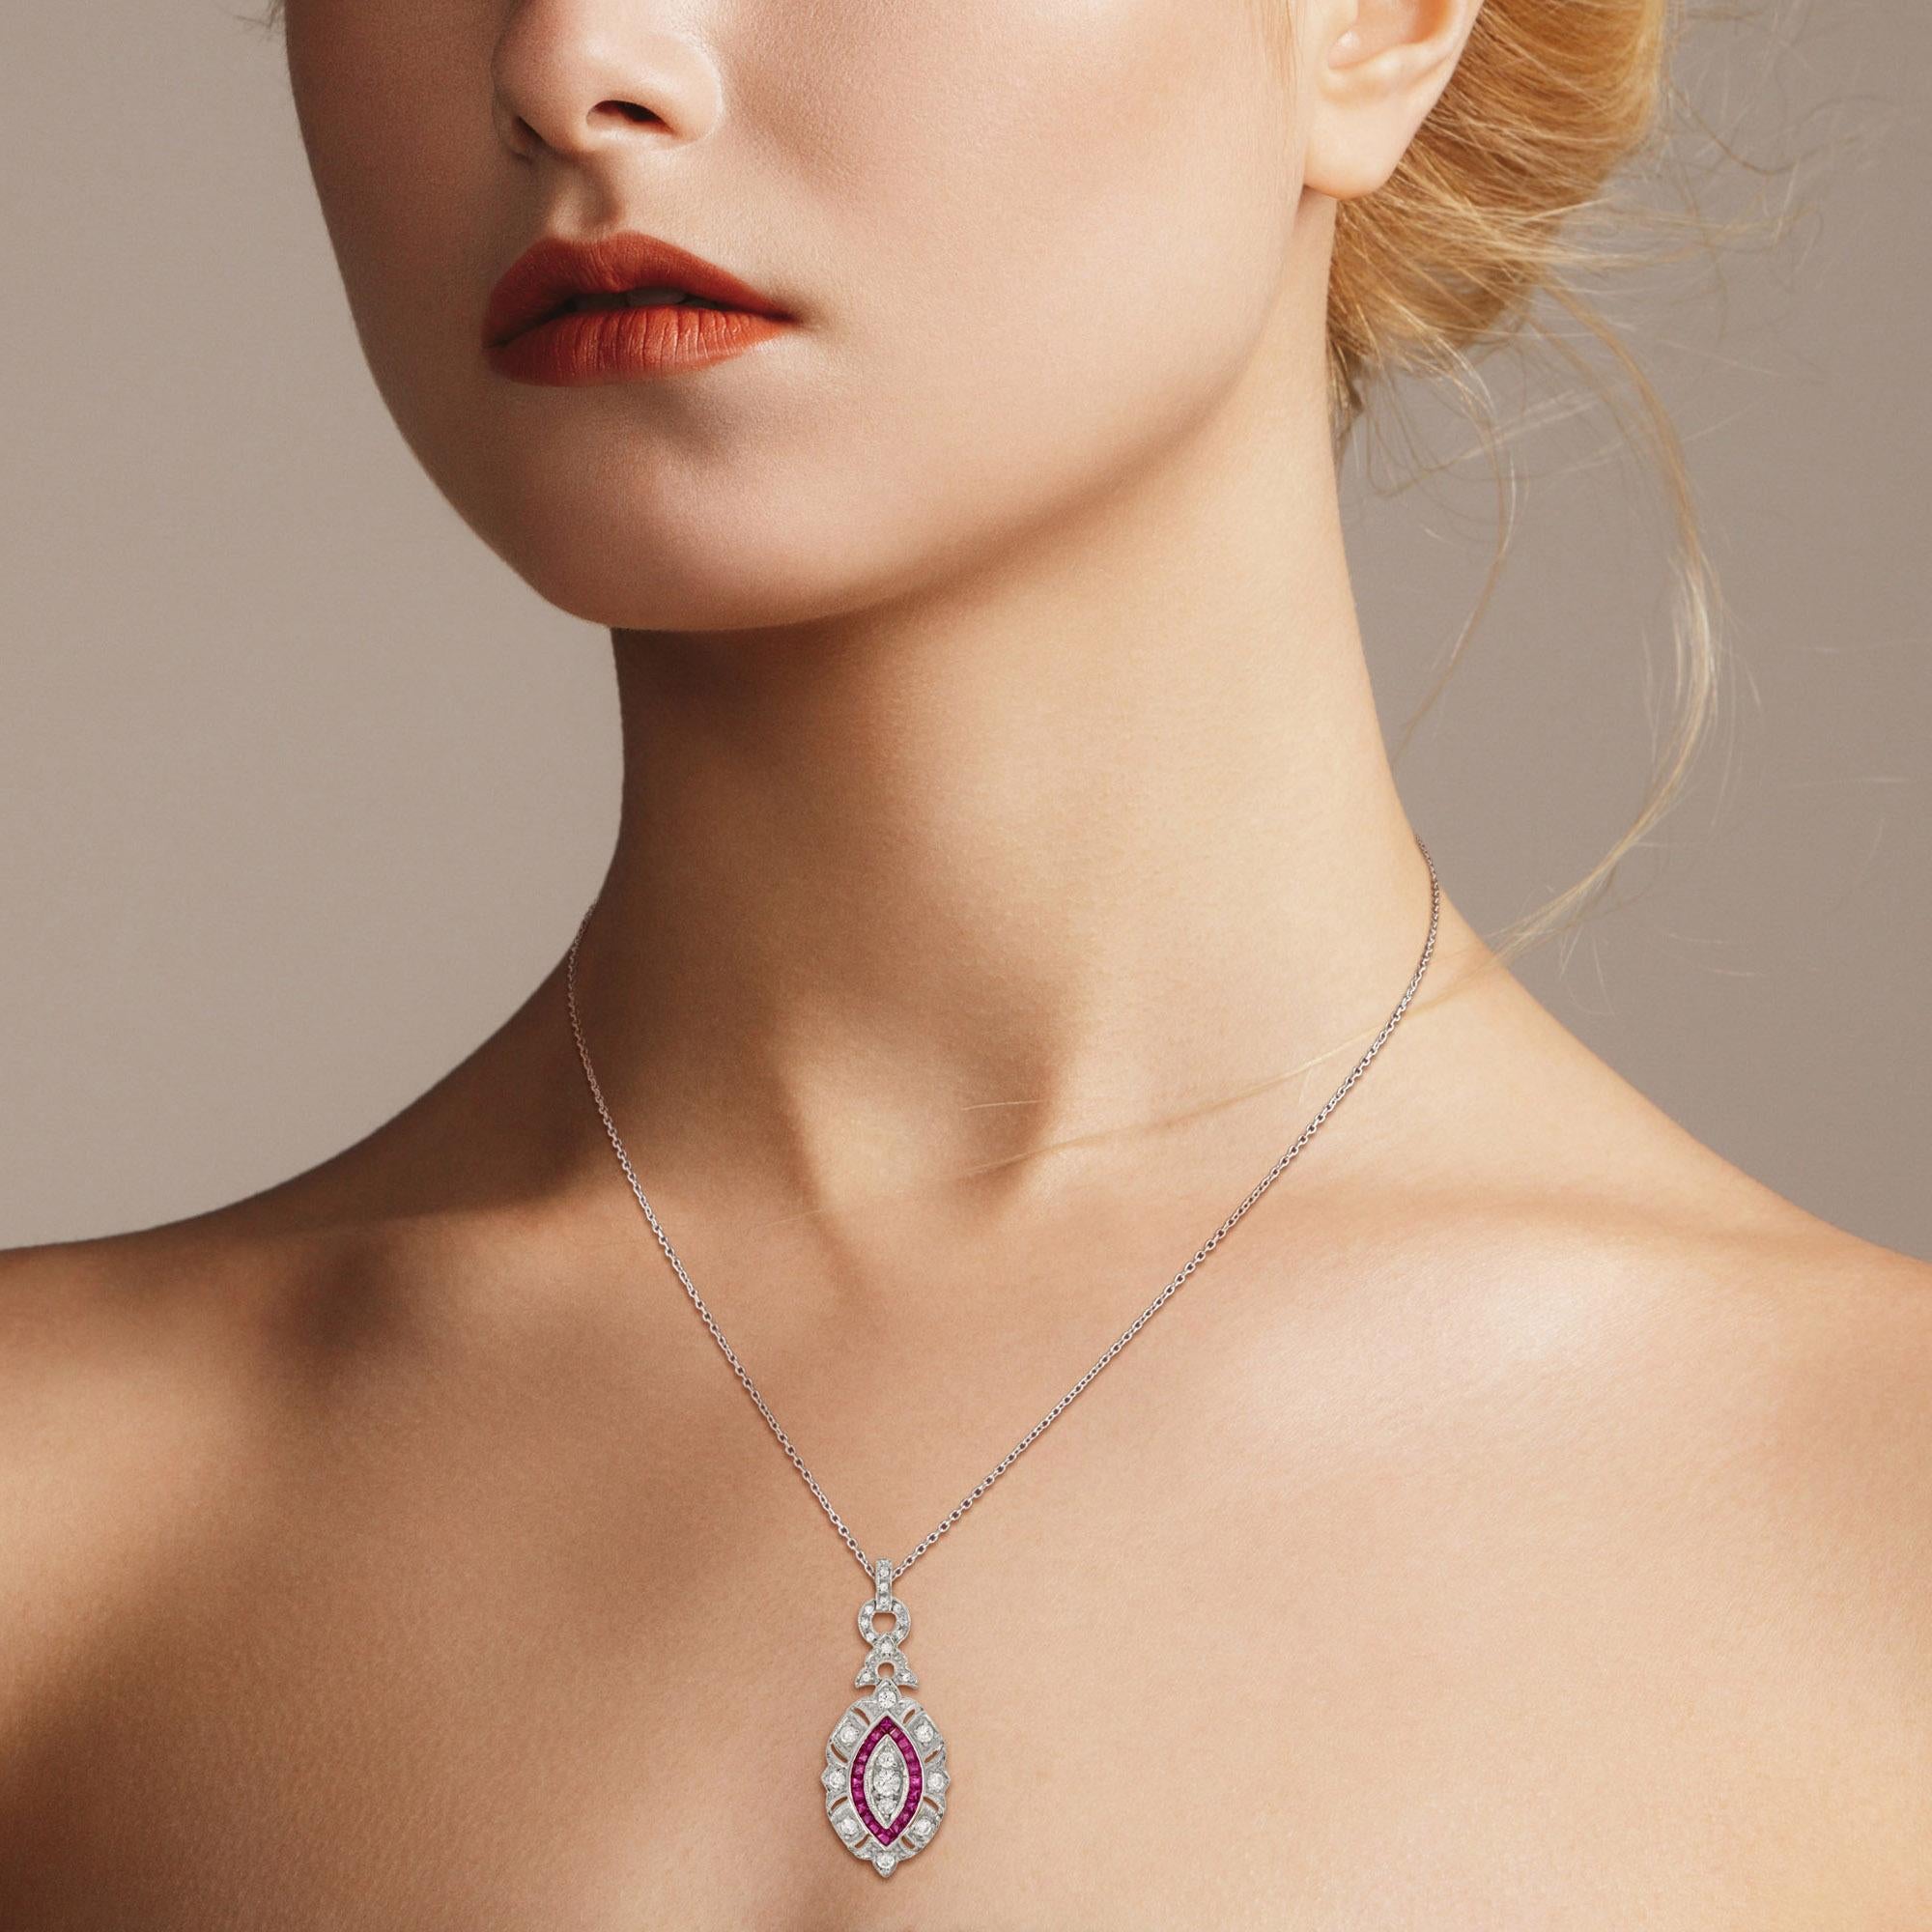 This beautiful Art Deco style pendant is finished in brightly polished 18K White gold. Delicately set across the face of the pendant are three round diamonds surrounded by French cut natural ruby. The entire pendant is adorned with round diamonds. A